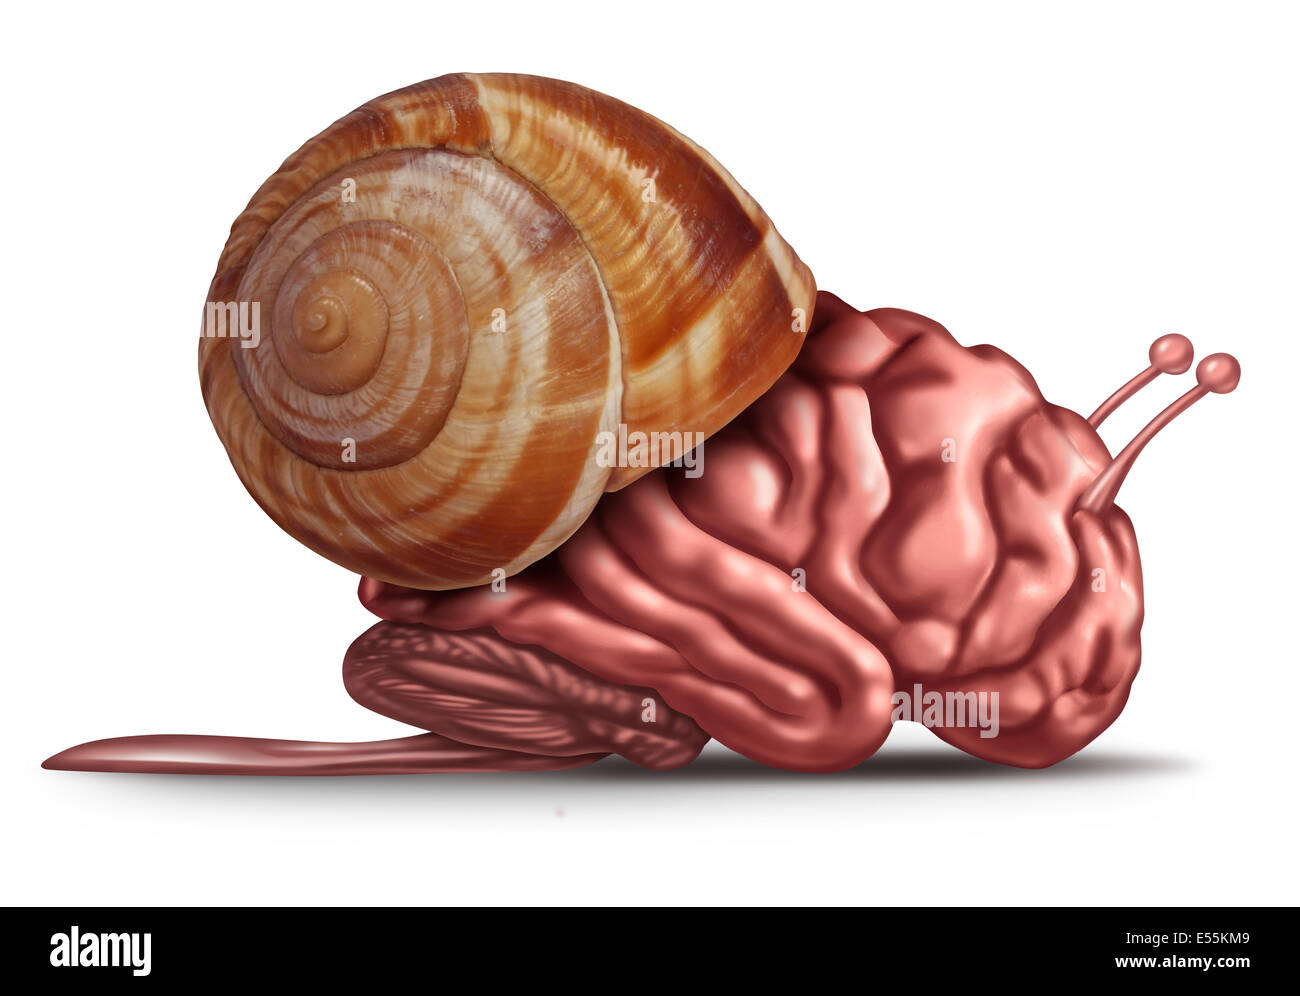 Thinking slow and brain function problems concept as a human organ in a snail shell as a mental health symbol for struggling with memory and  dementia as alzheimer or neurology challenges. Stock Photo